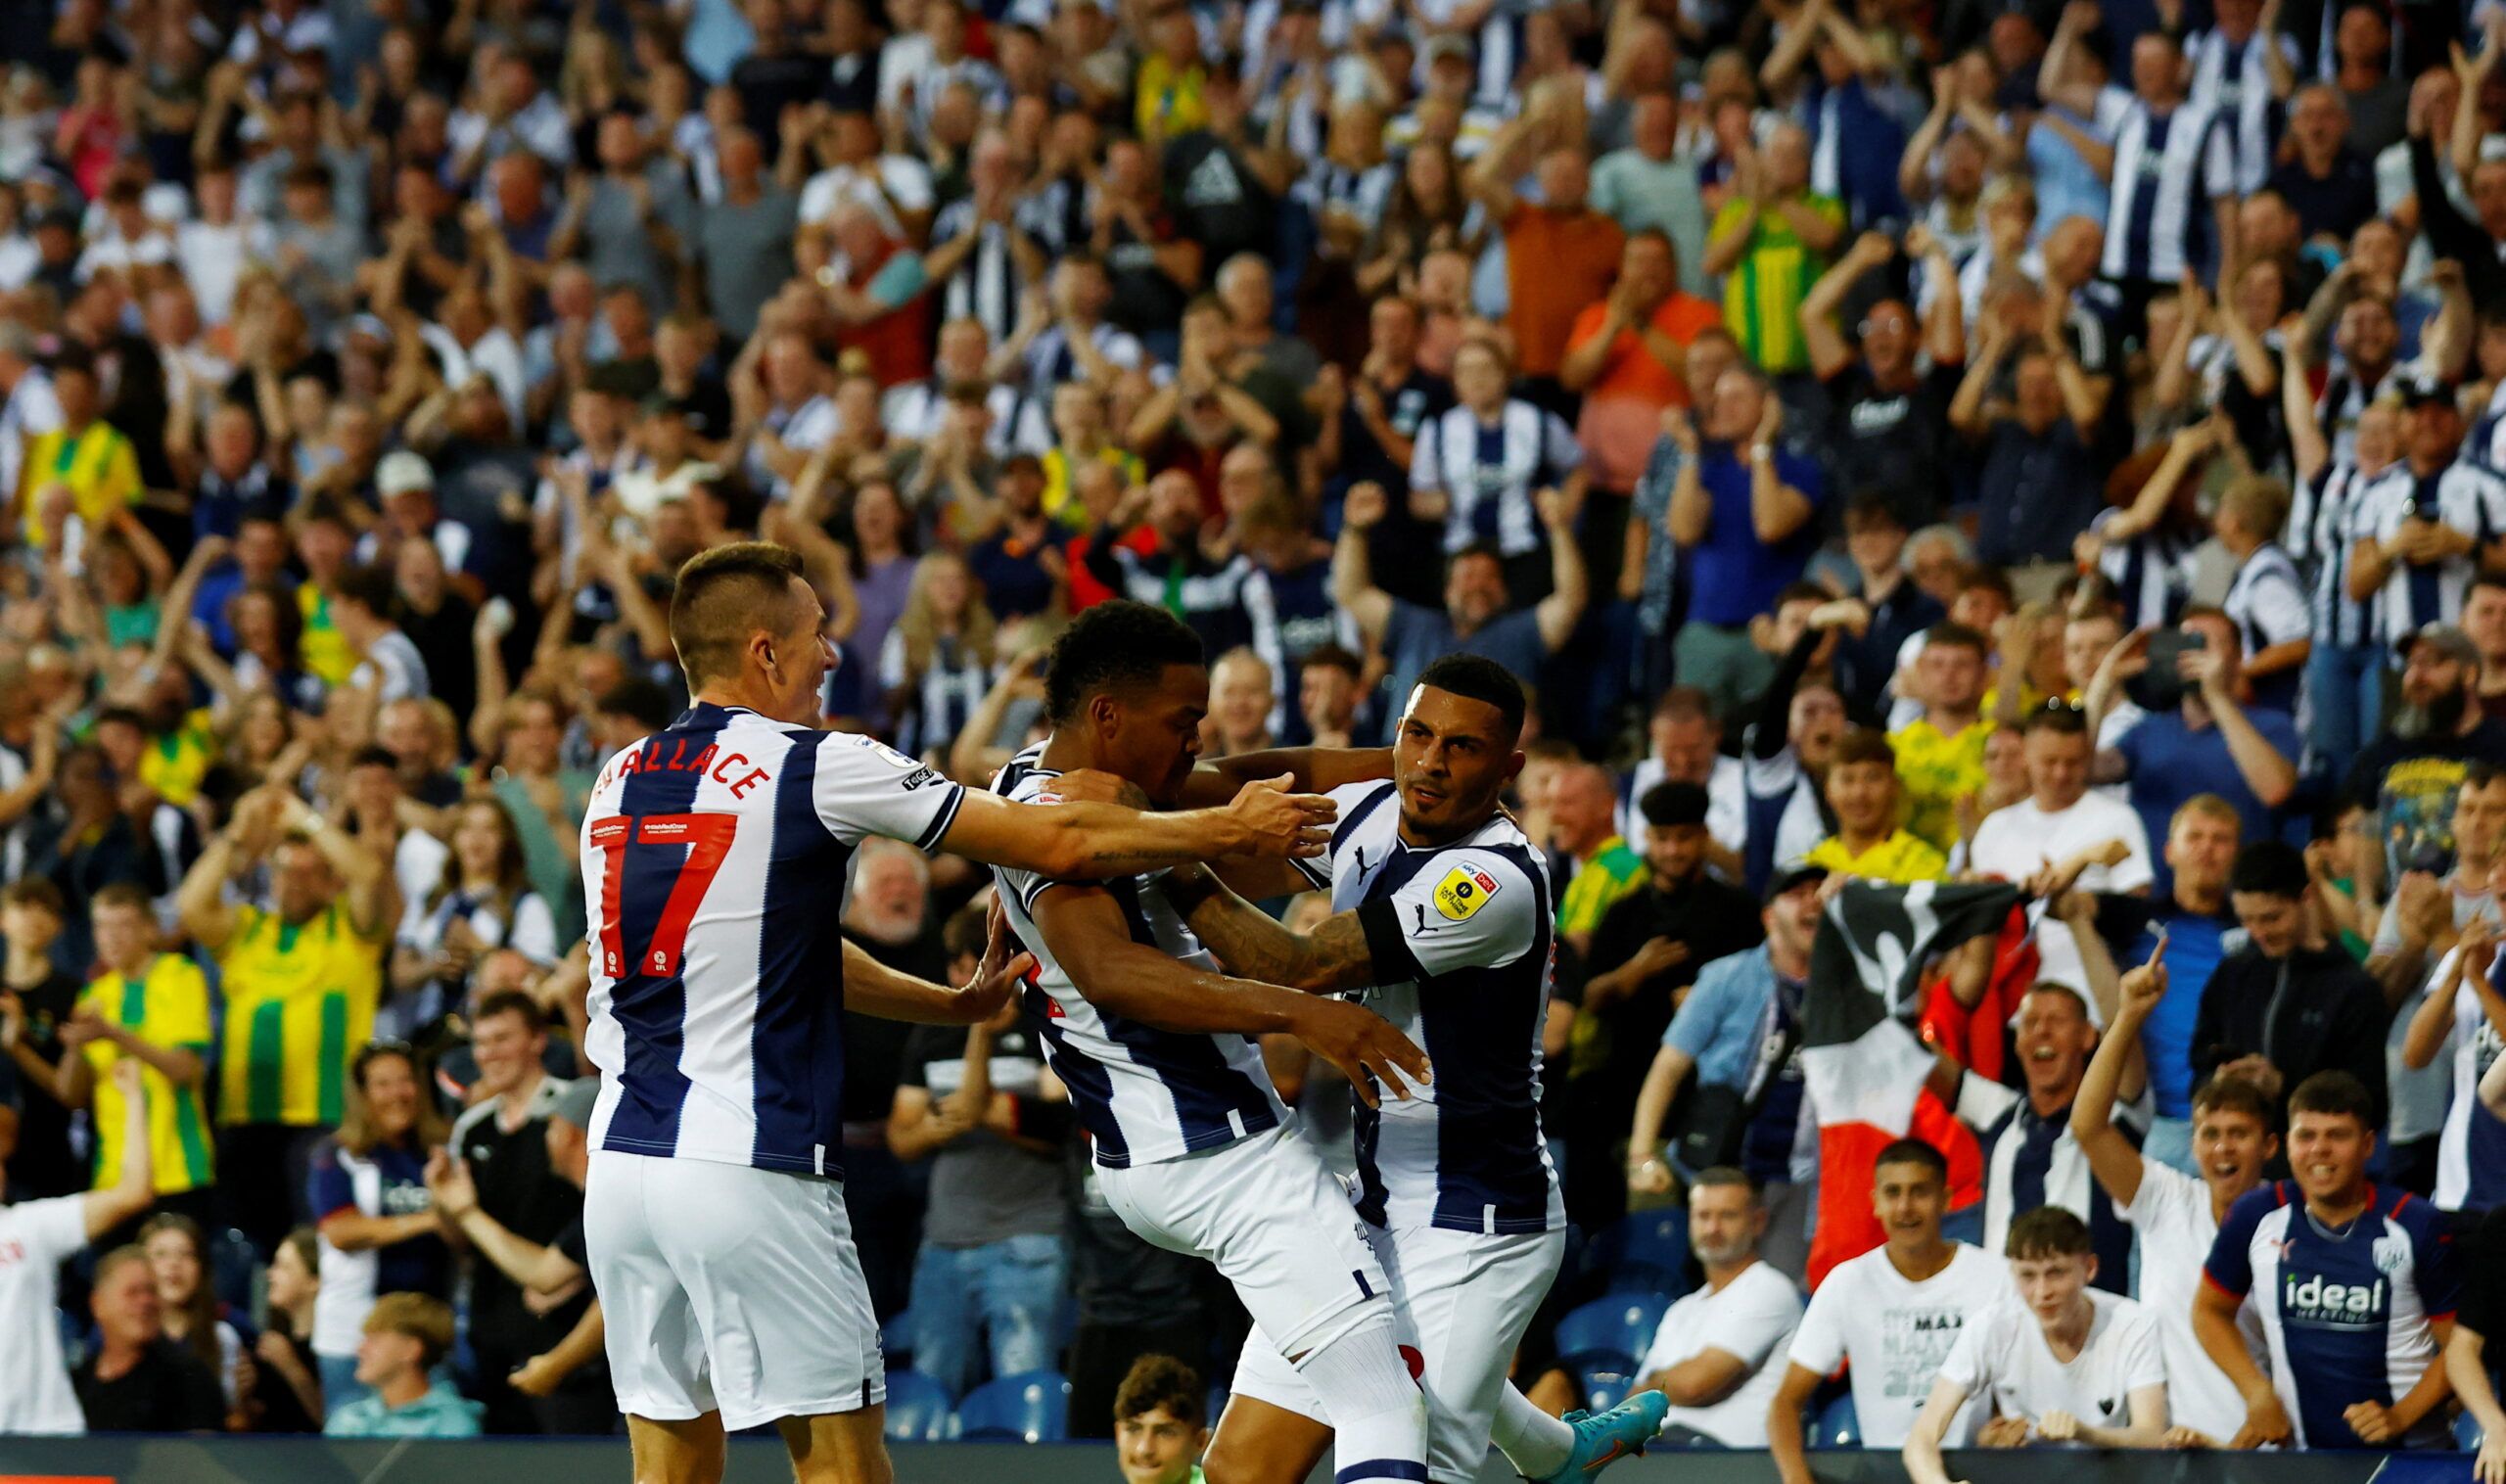 Soccer Football - Championship - West Bromwich Albion v Watford - The Hawthorns, West Bromwich, Britain - August 8, 2022  West Bromwich Albion's Karlan Grant celebrates scoring their first goal Action Images/Andrew Boyers  EDITORIAL USE ONLY. No use with unauthorized audio, video, data, fixture lists, club/league logos or 